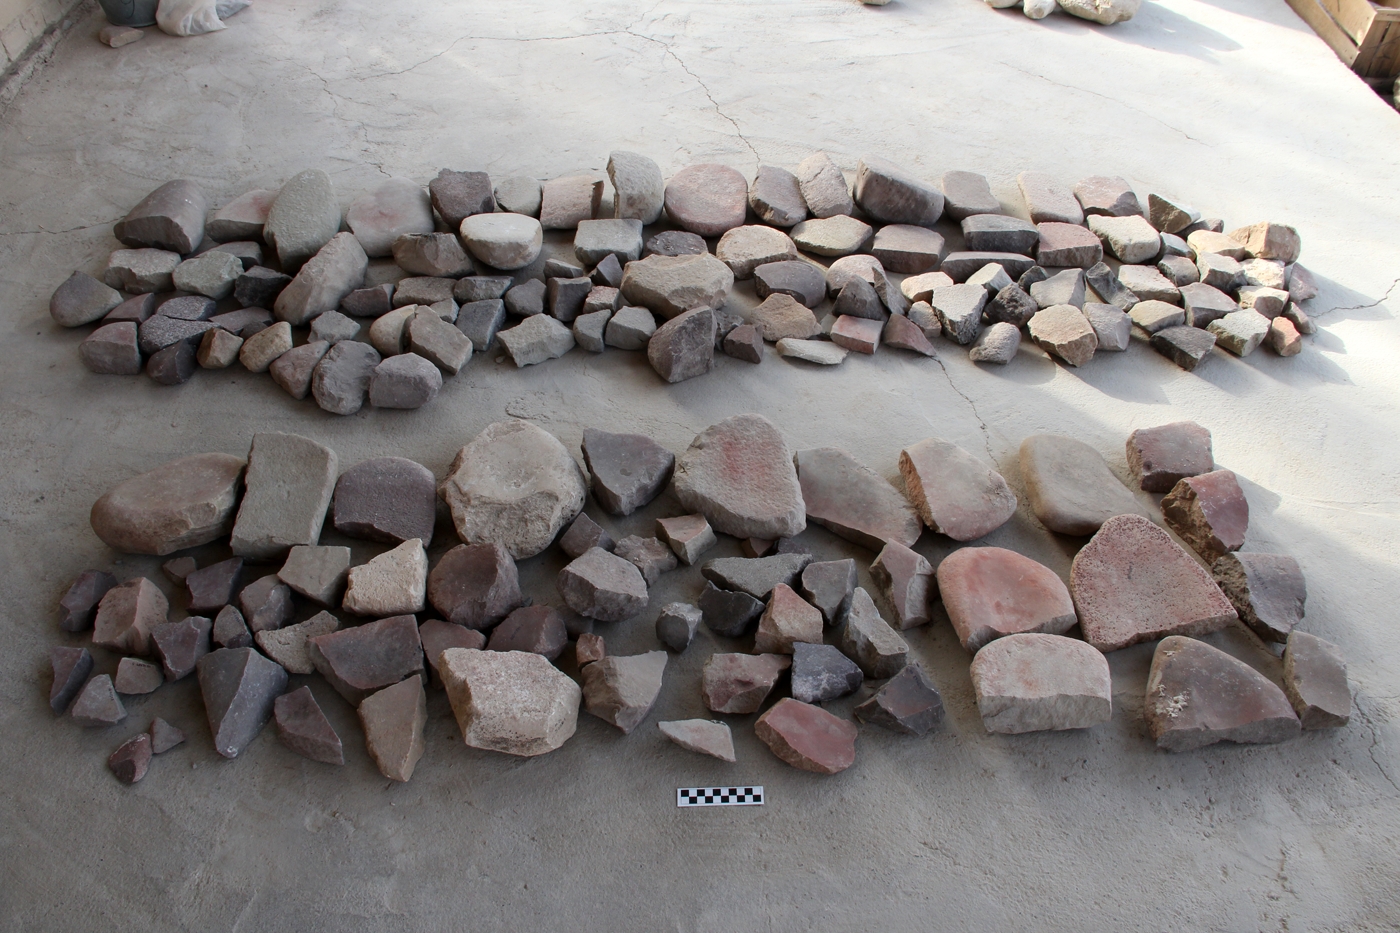 Grinding stones in various shapes, degrees of use, and fragmentation